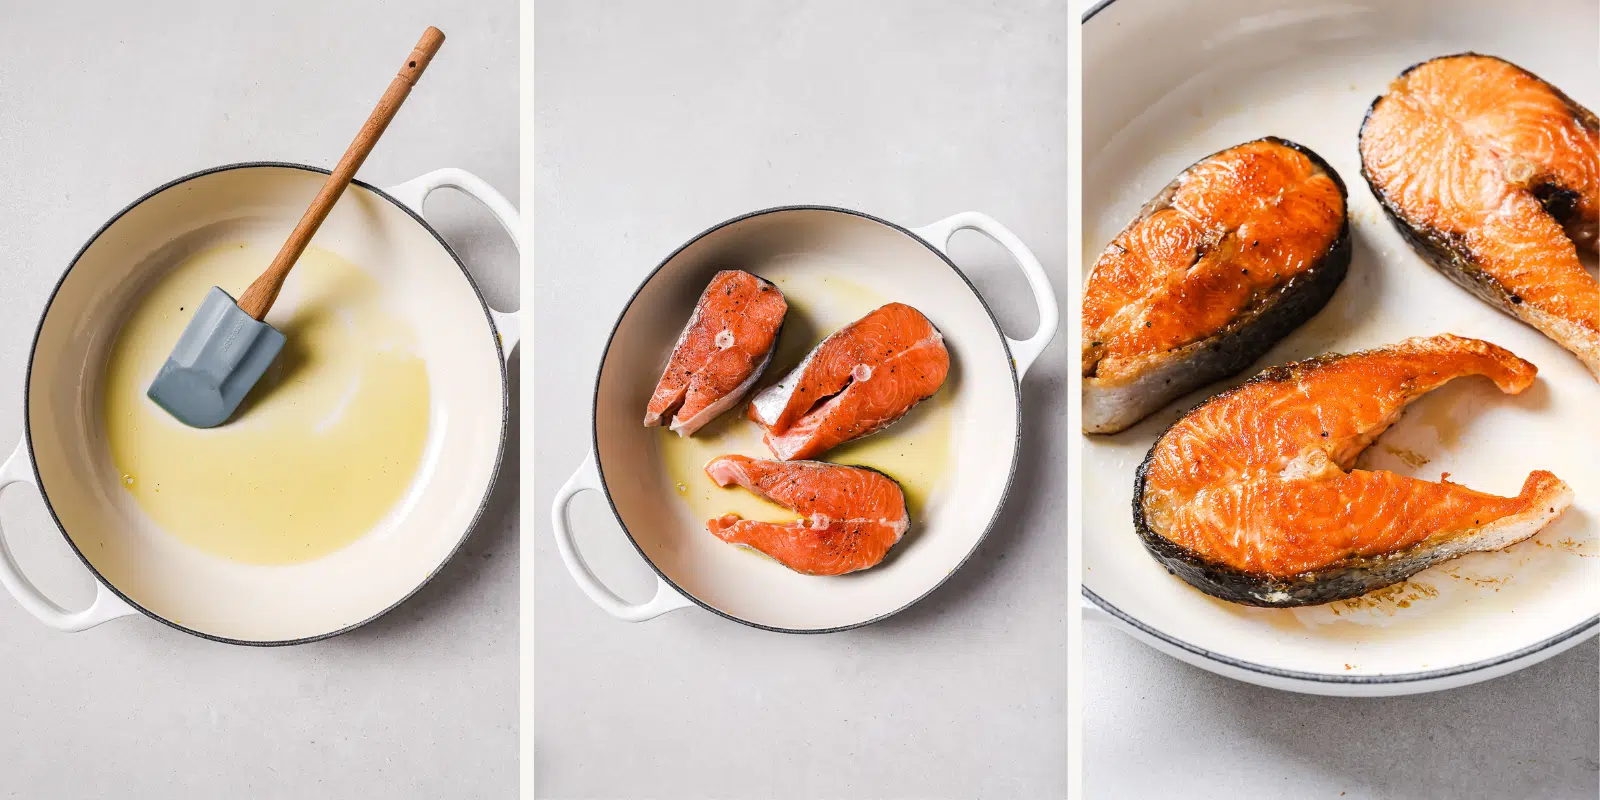 Left: oil in a skillet. Center: salmon steaks cooking. Right: cooked salmon on a plate.